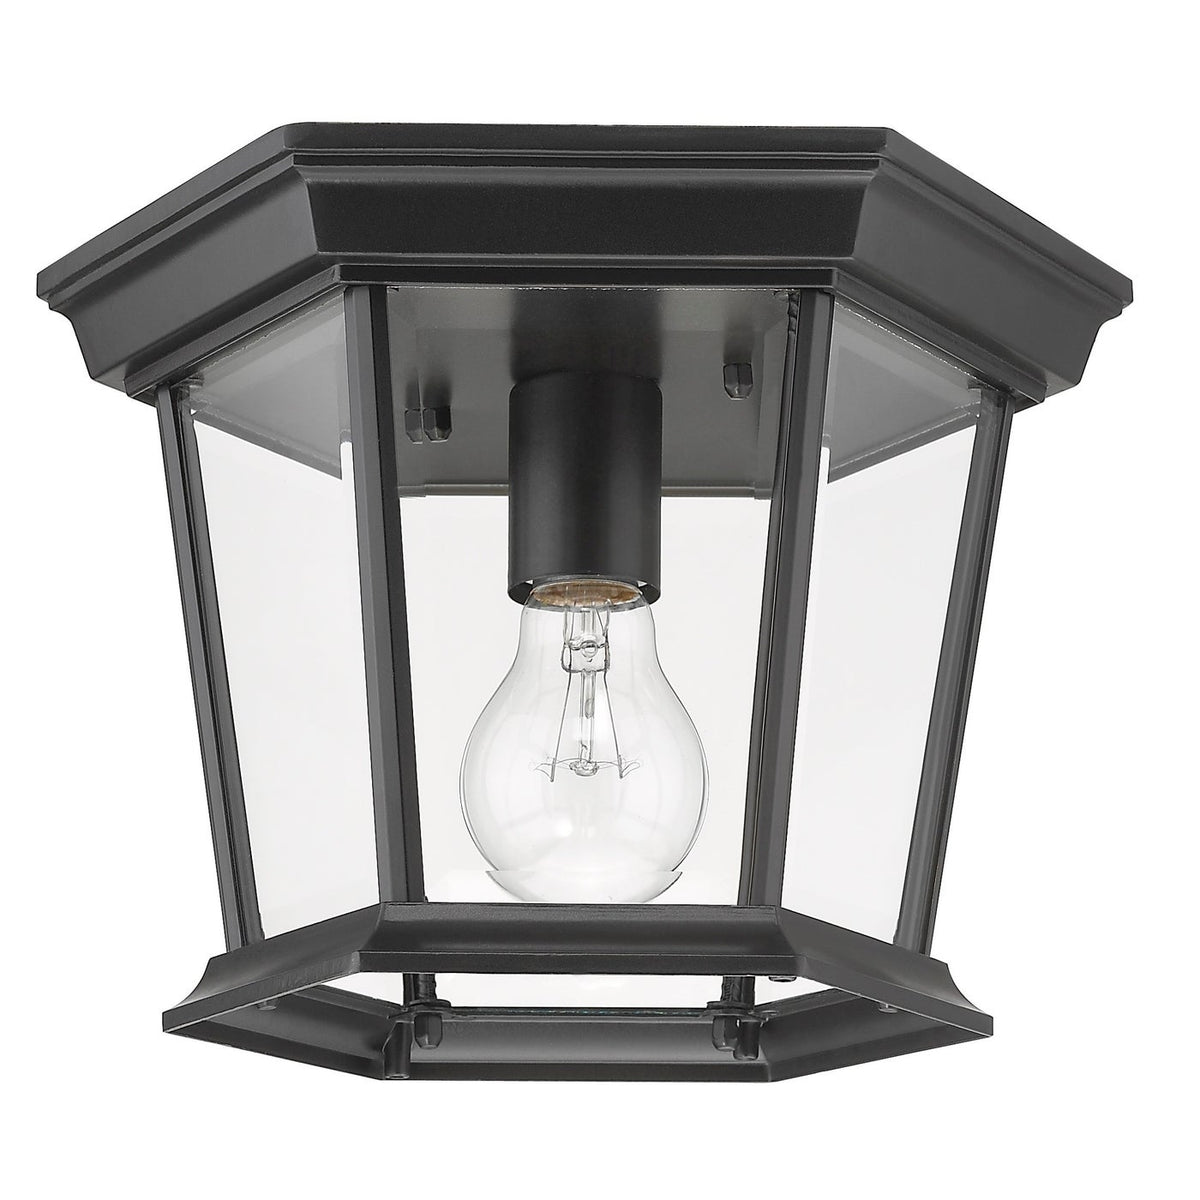 Farmhouse outdoor ceiling light with black metal fixture and clear glass. Complements country décor. UL Listed for wet locations. 11&quot;W x 7.5&quot;H.